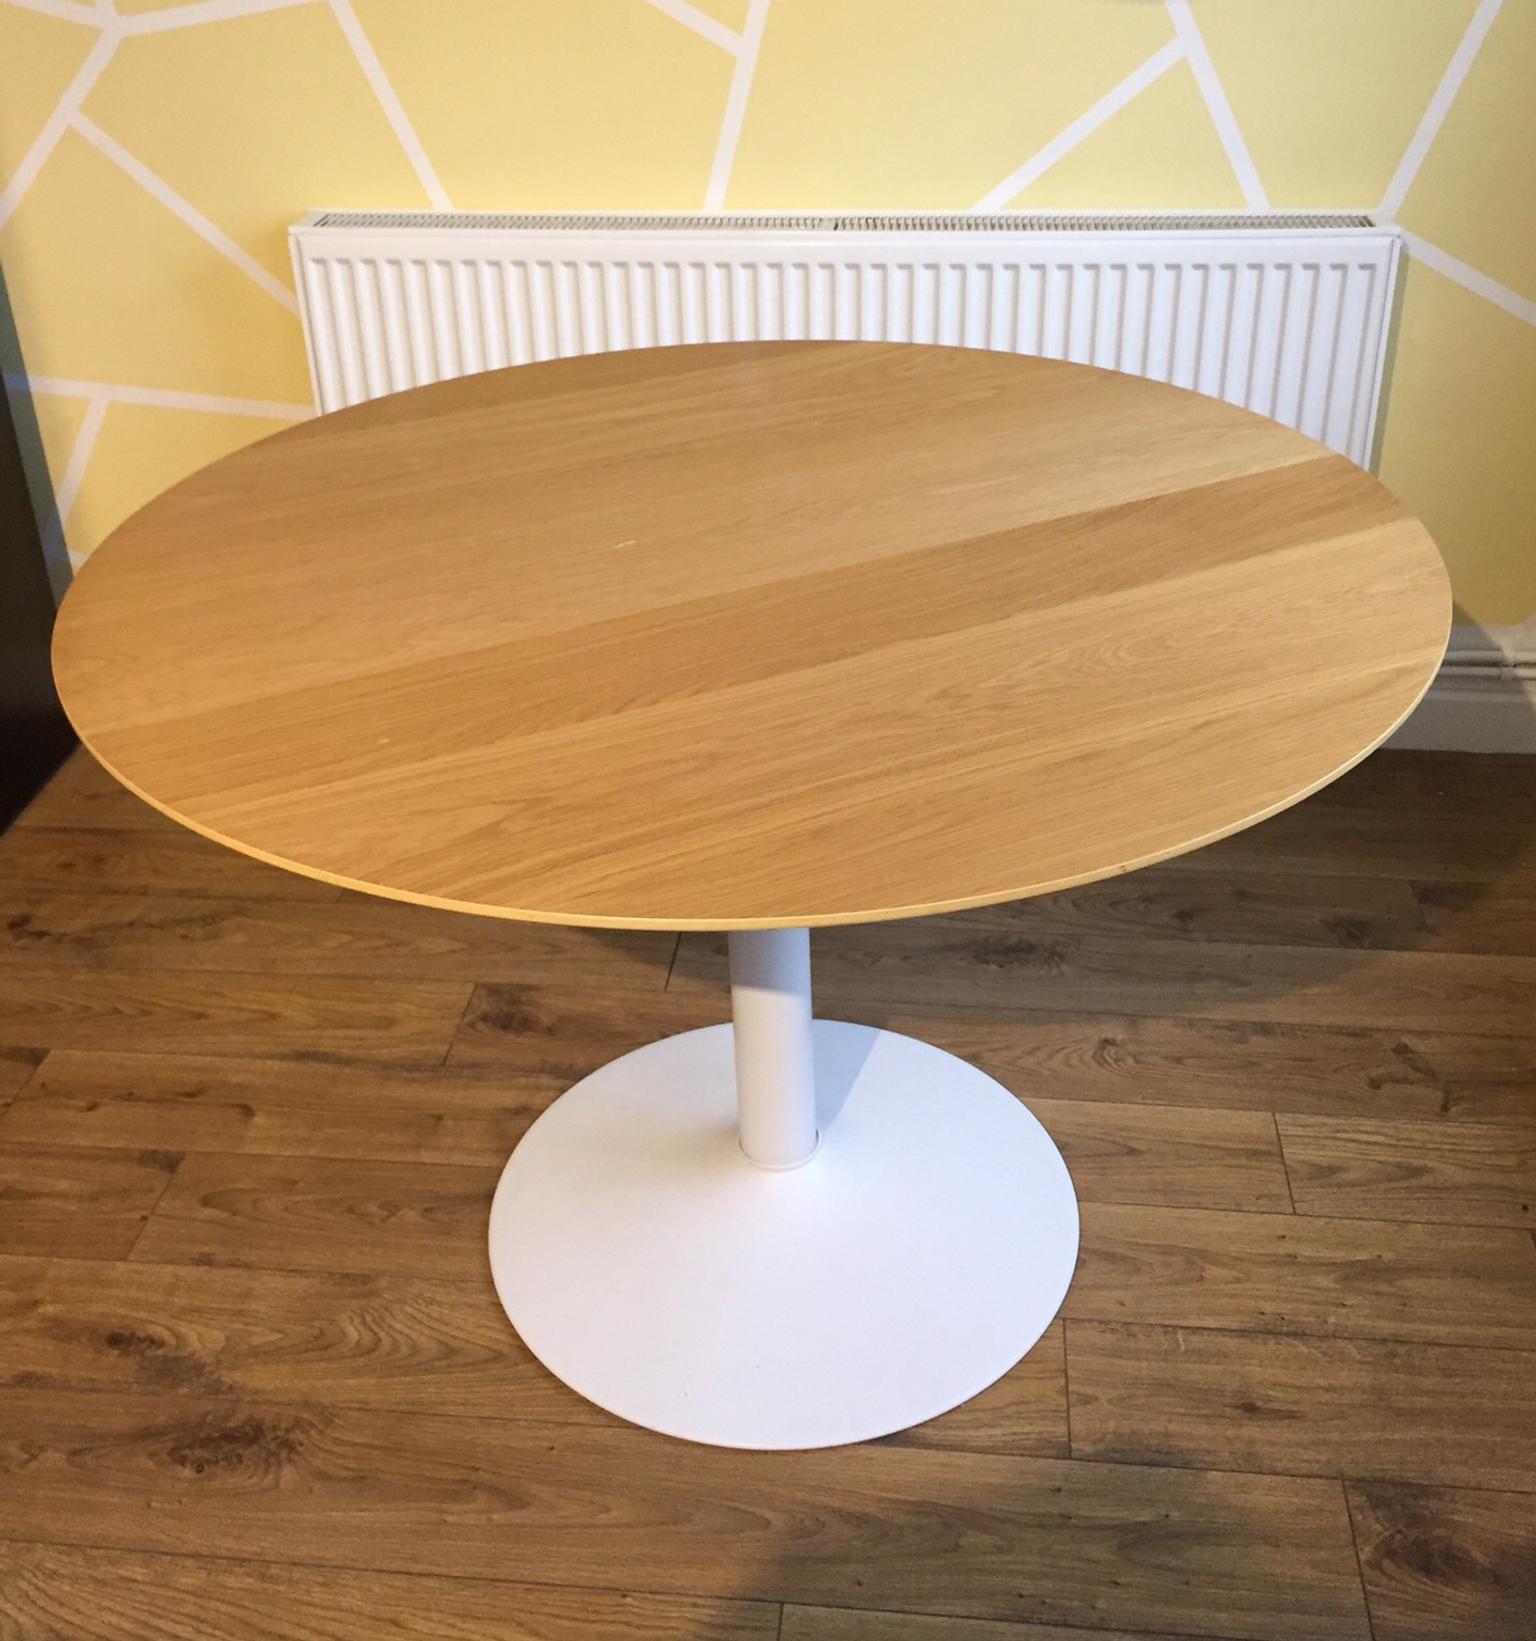 Oak Round Dining Table Habitat In Bl2 Bolton For £45.00 For Sale Shpock